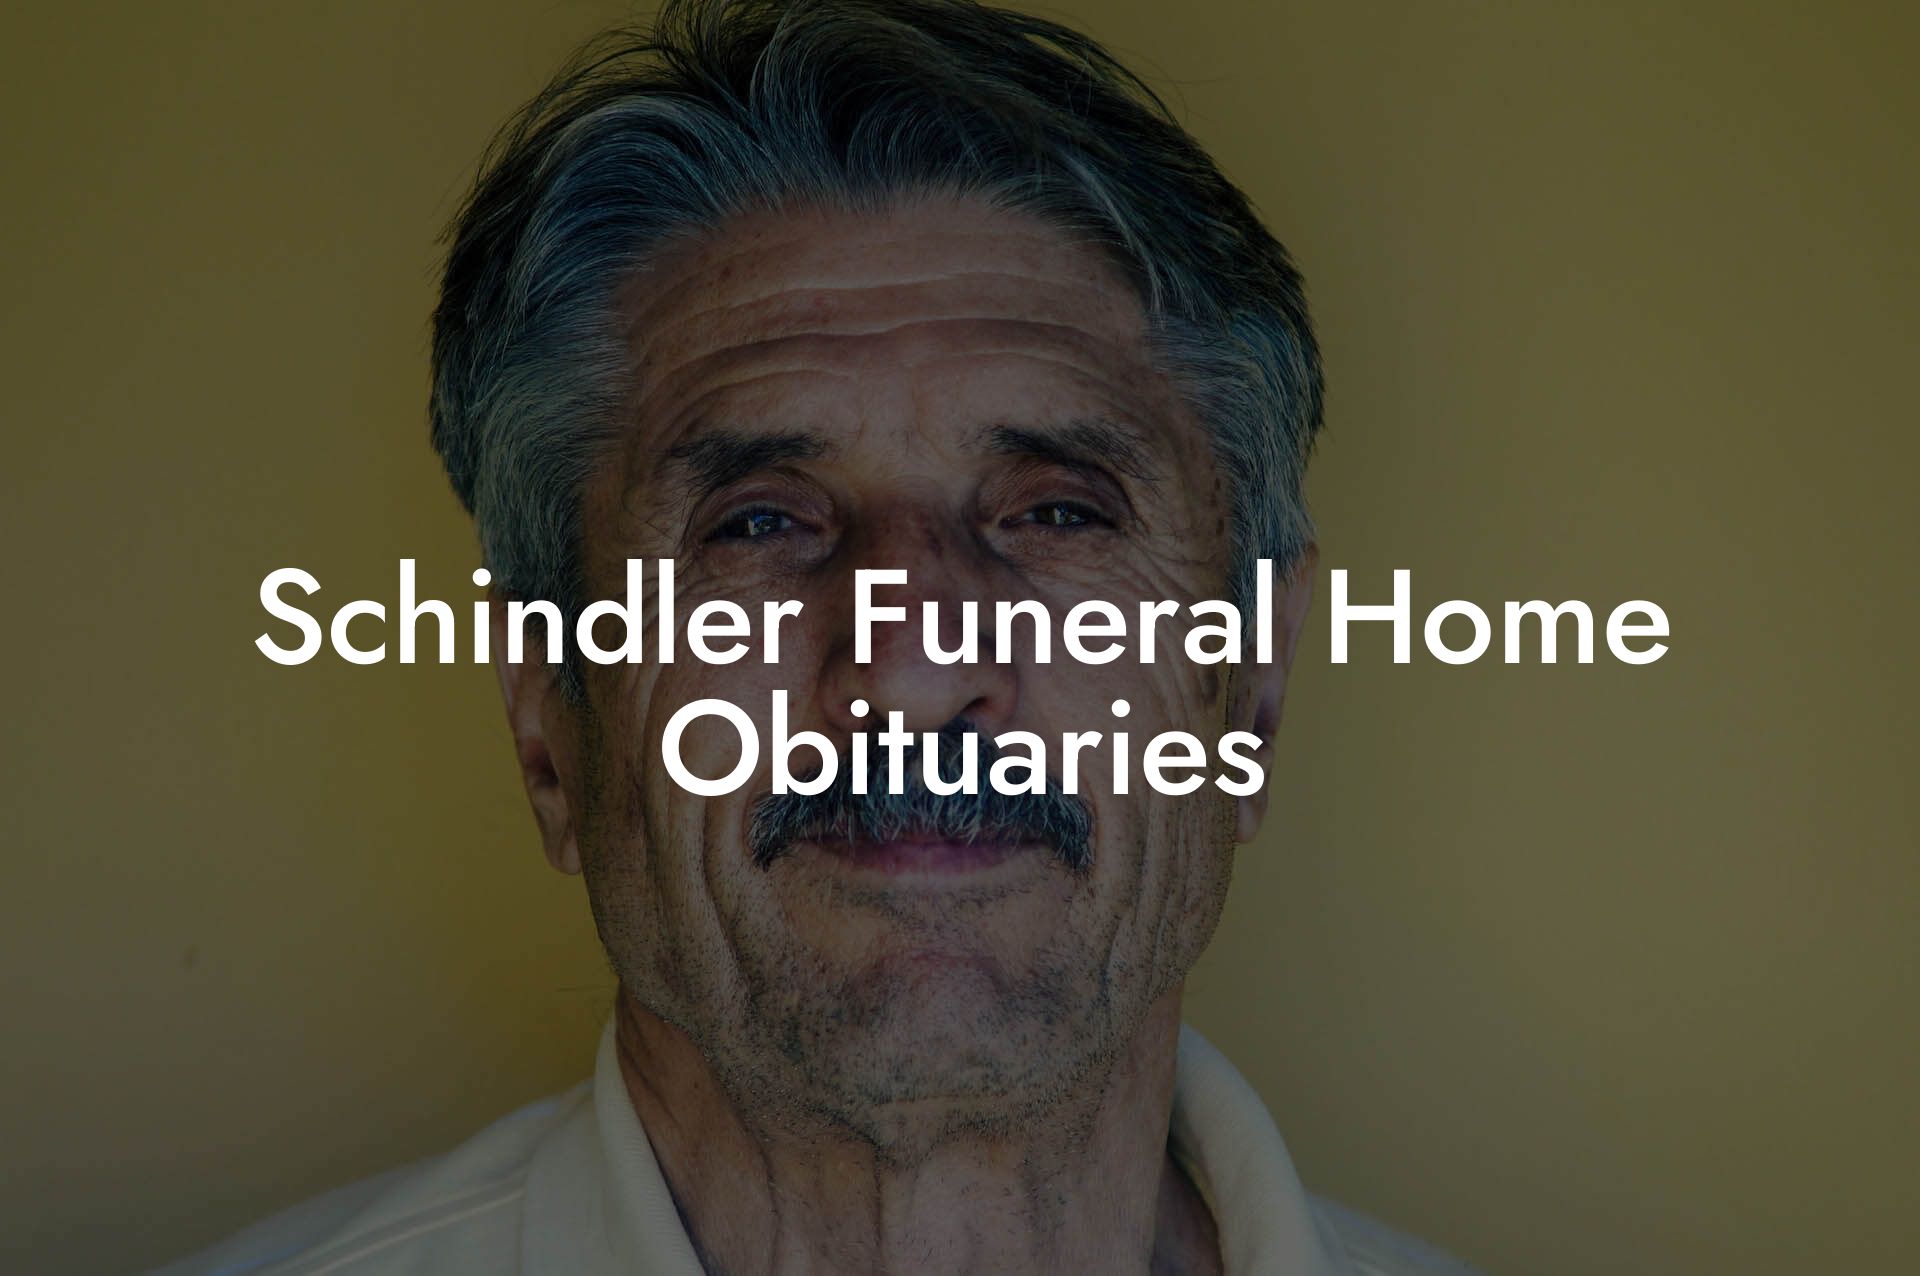 Schindler Funeral Home Obituaries